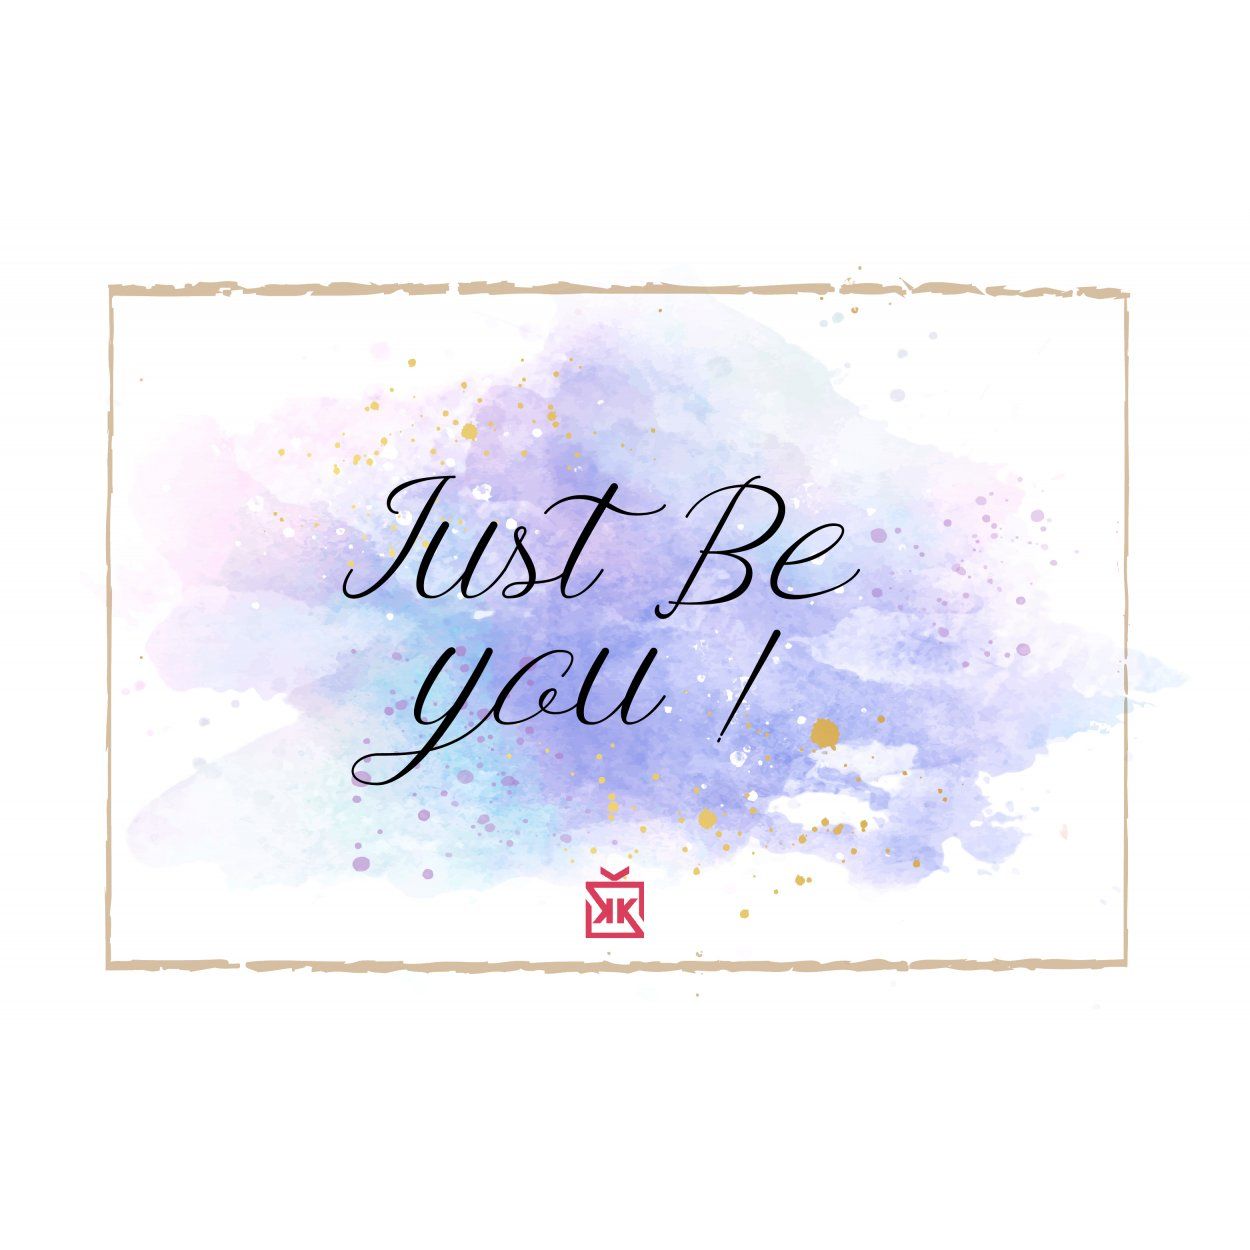 8862-just-be-you-motto-karti